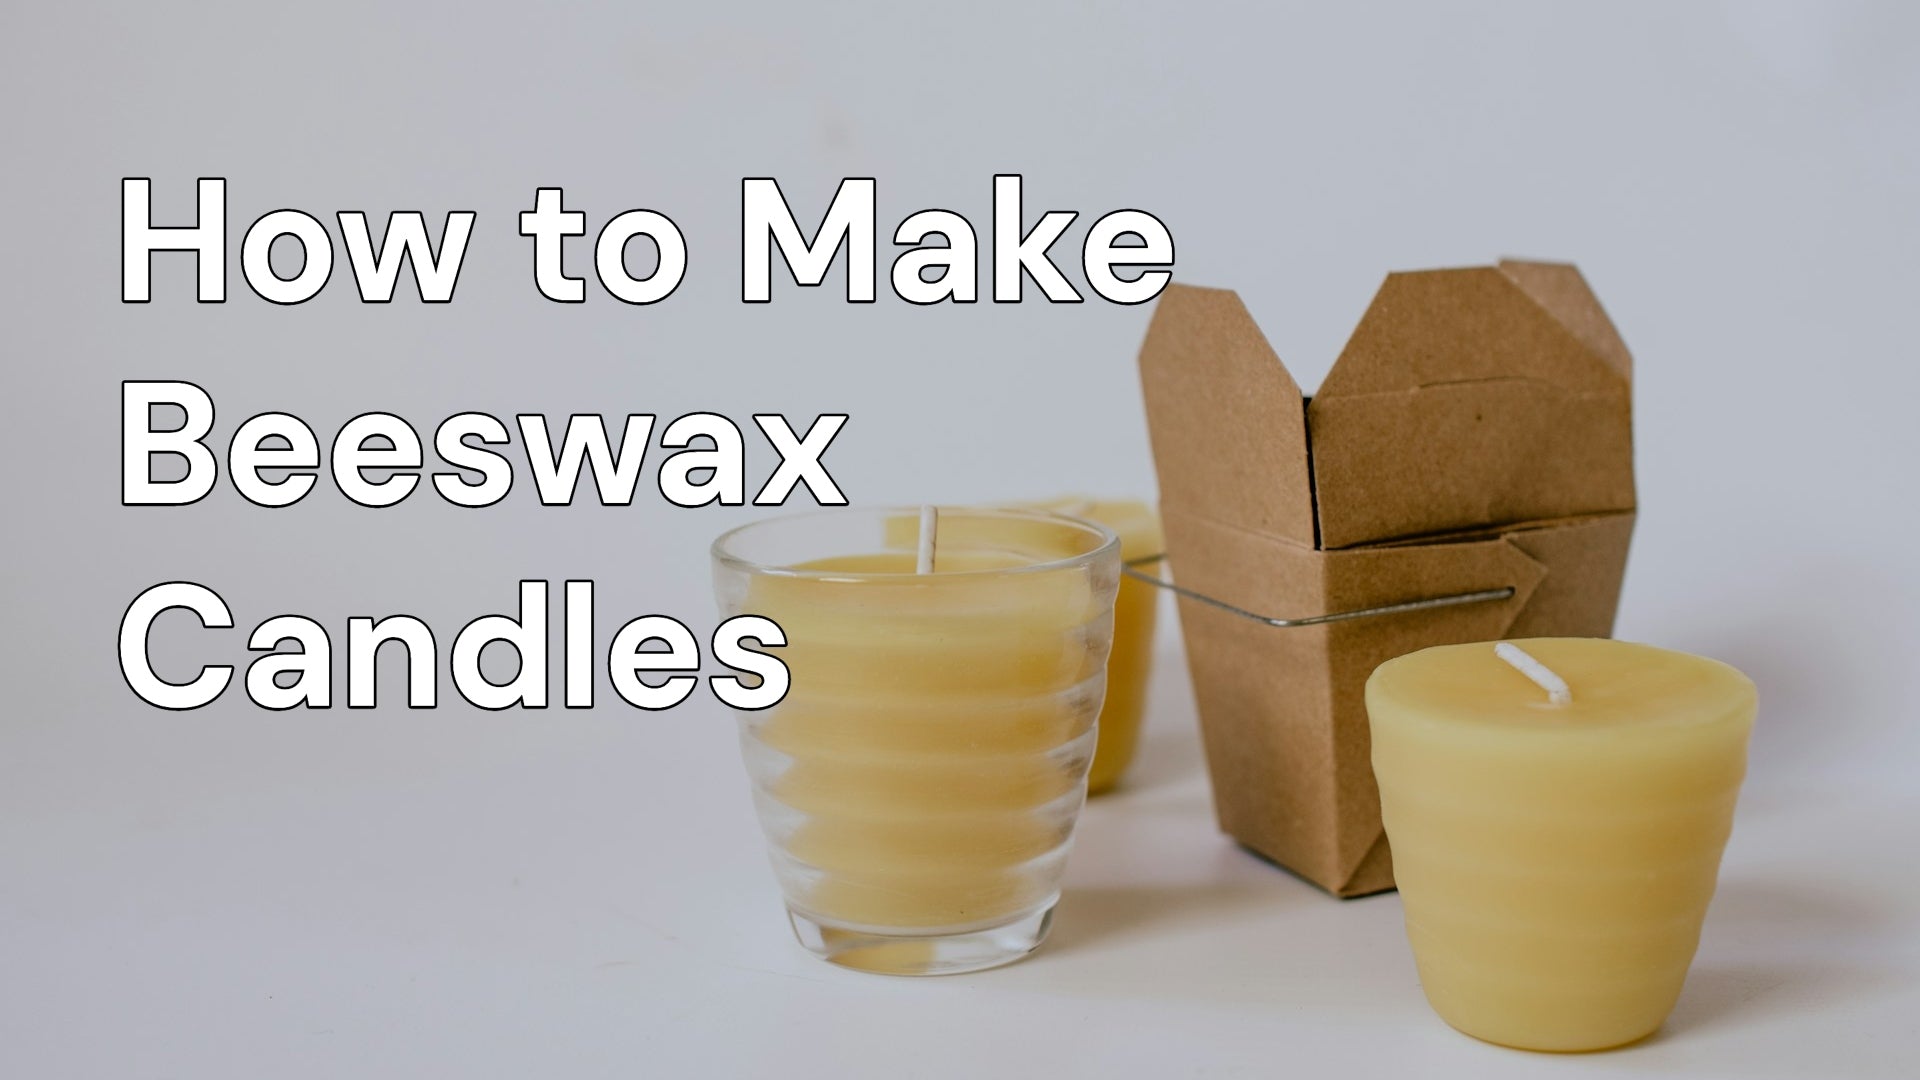 How To Make Beeswax Candles